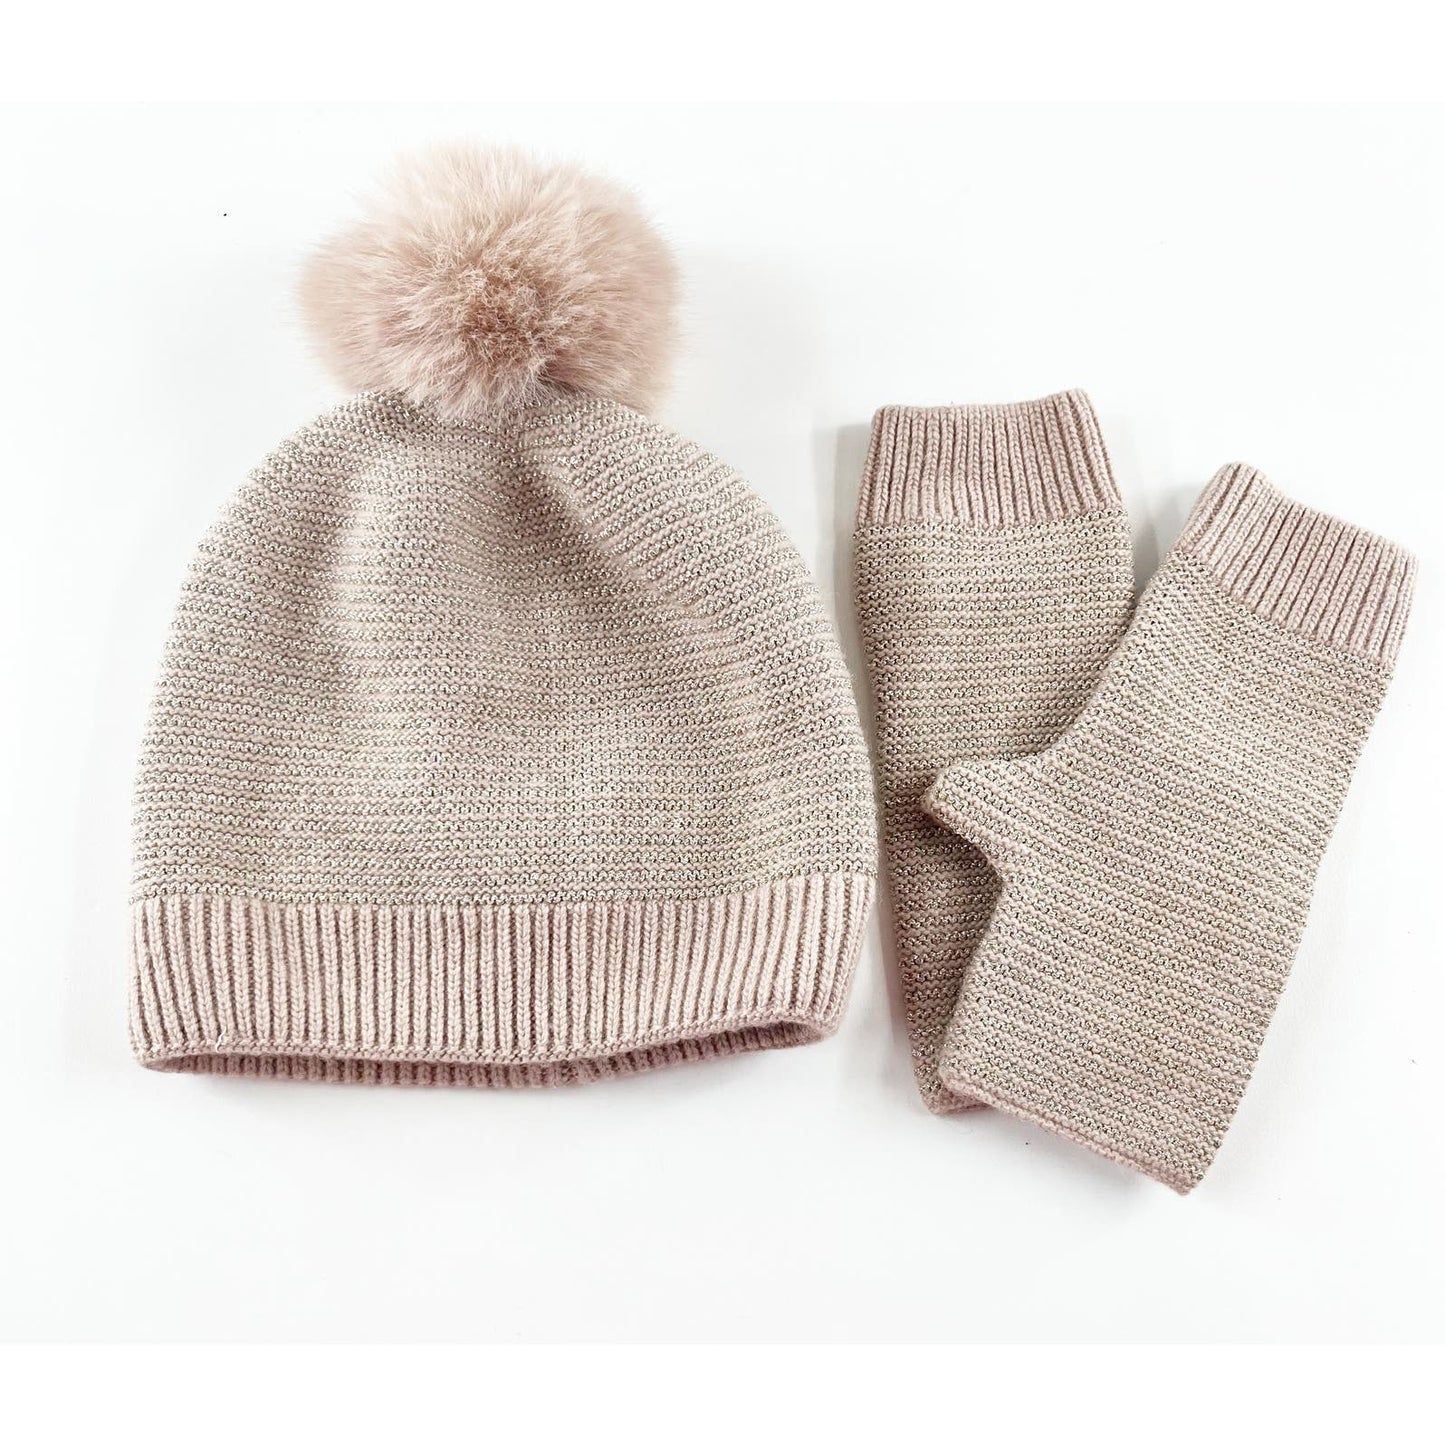 Chico's Pom Beanie Ribbed Knit Hat and Fingerless Mittens Set Pink